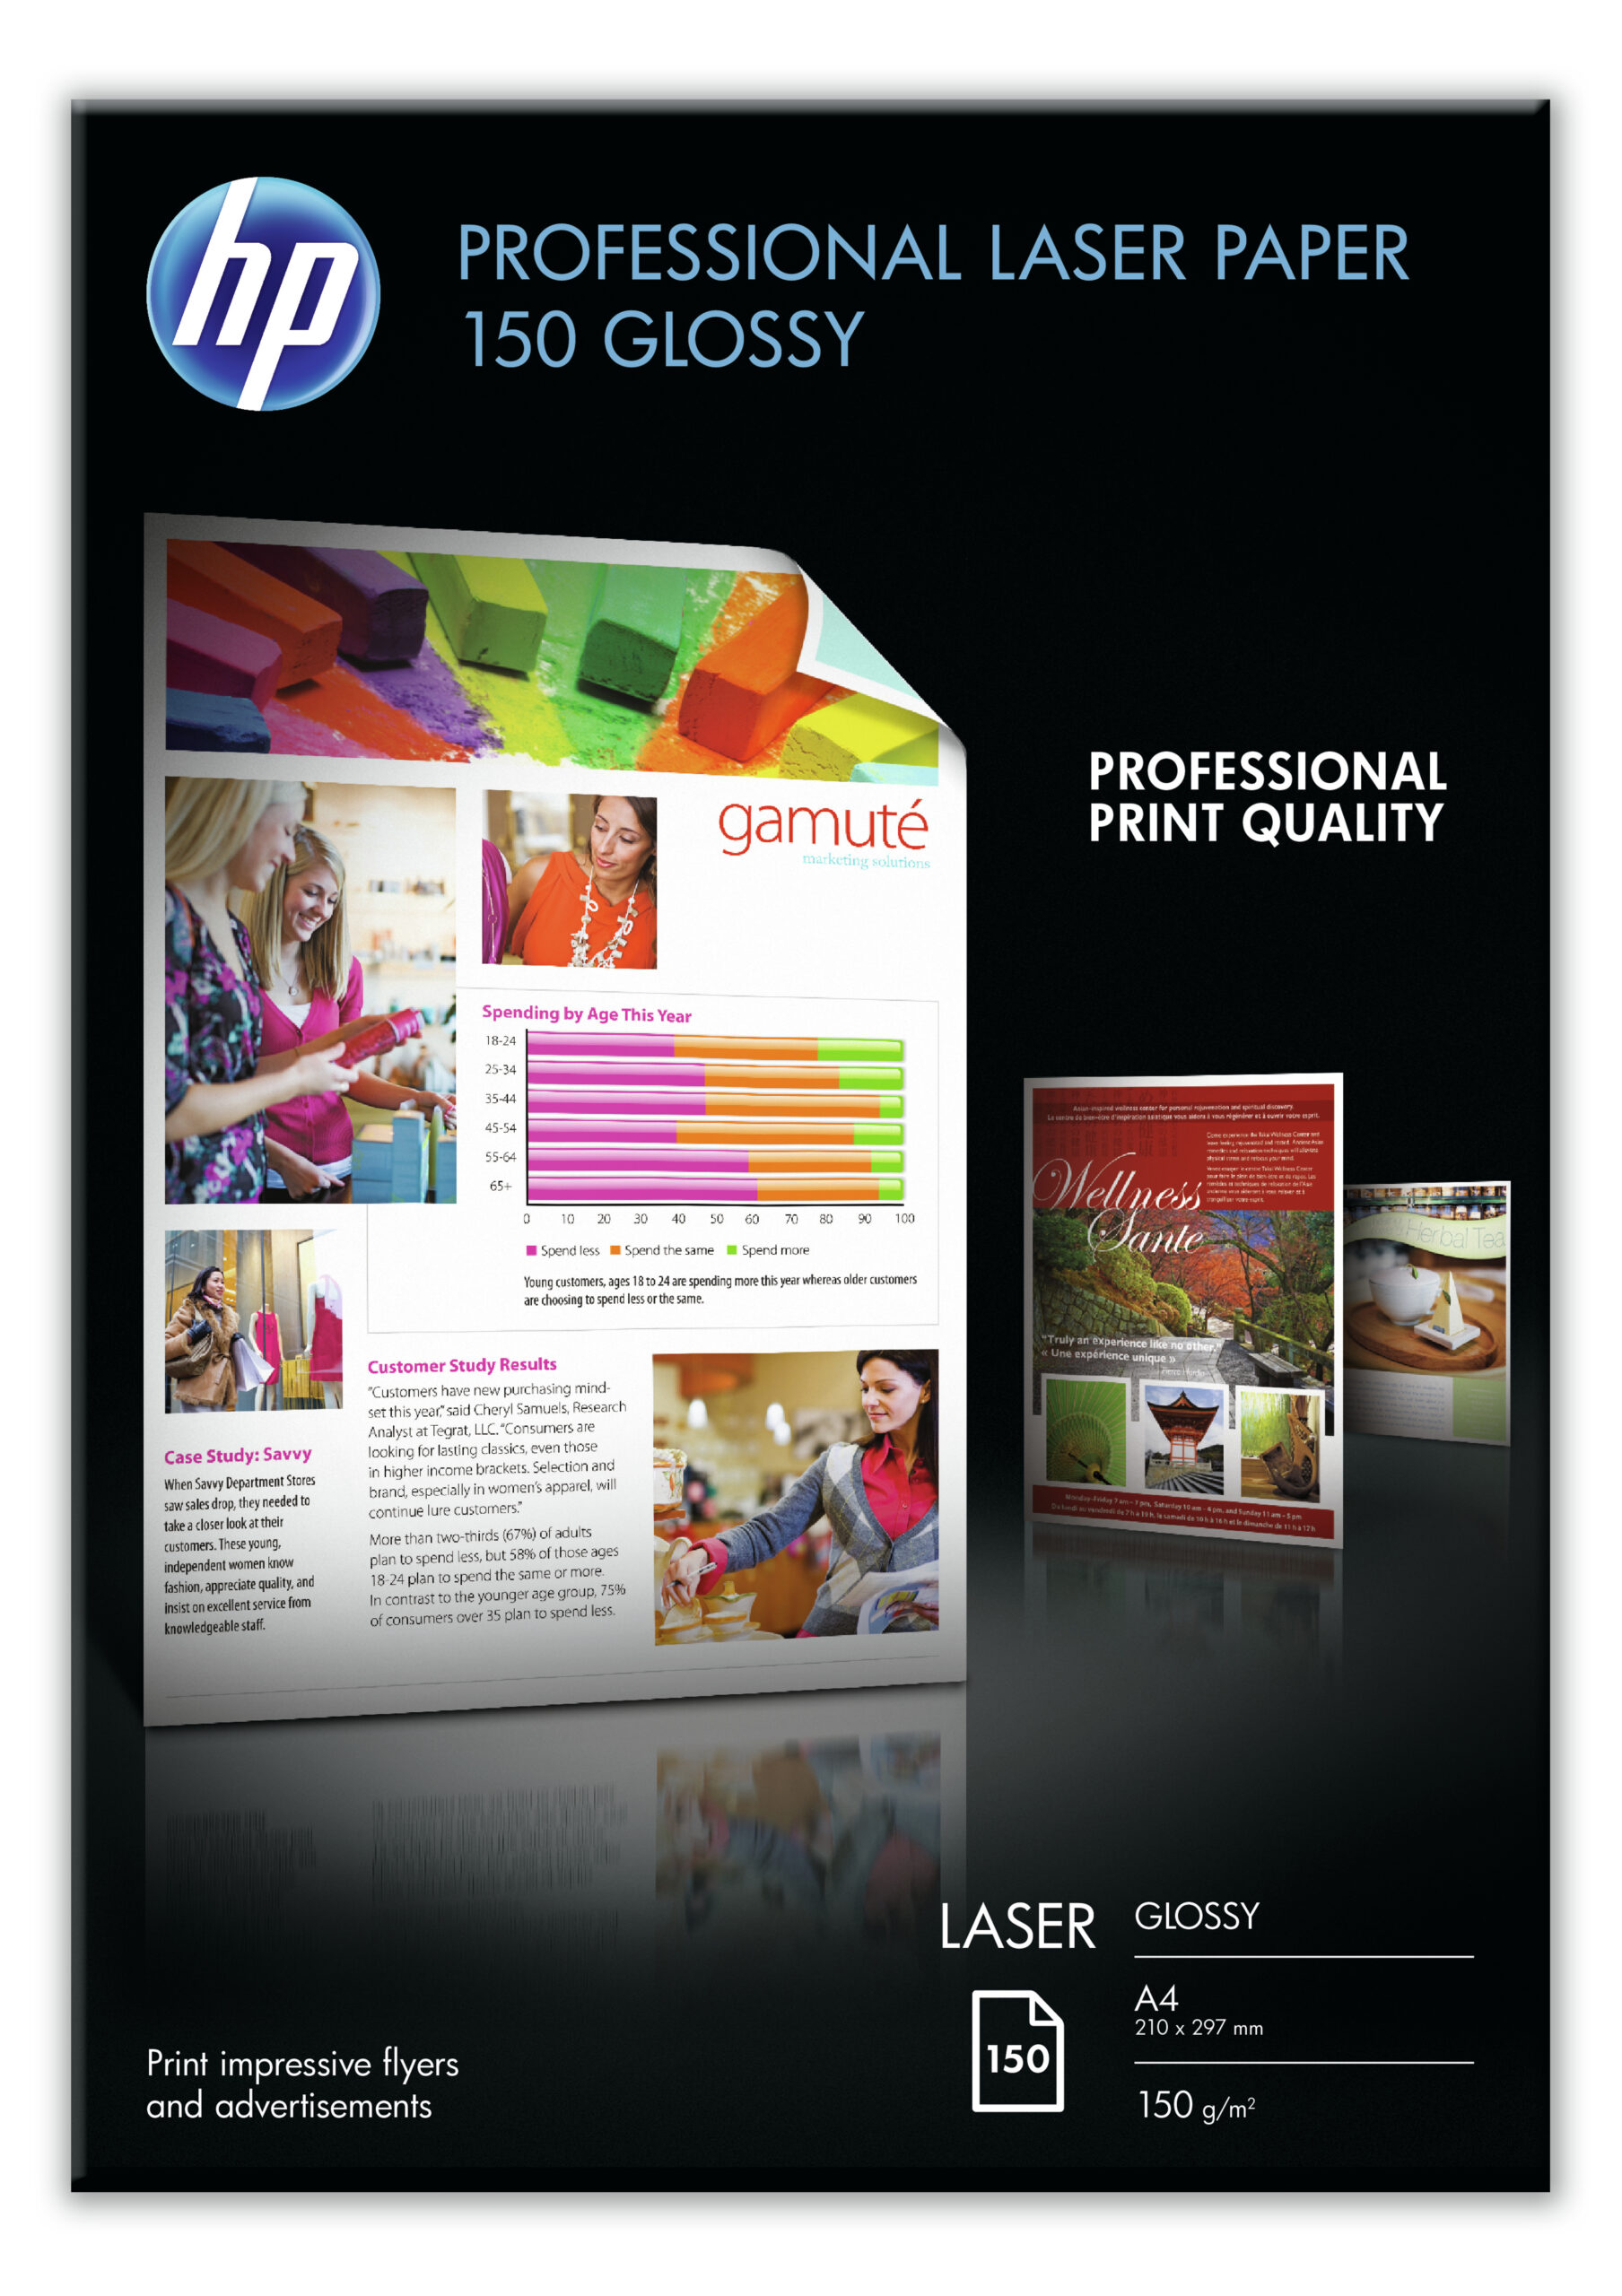 Risma 150 Fg Hp Professionale Glossy Paper 150g M2 A4 Laser Cg965a 884962310632